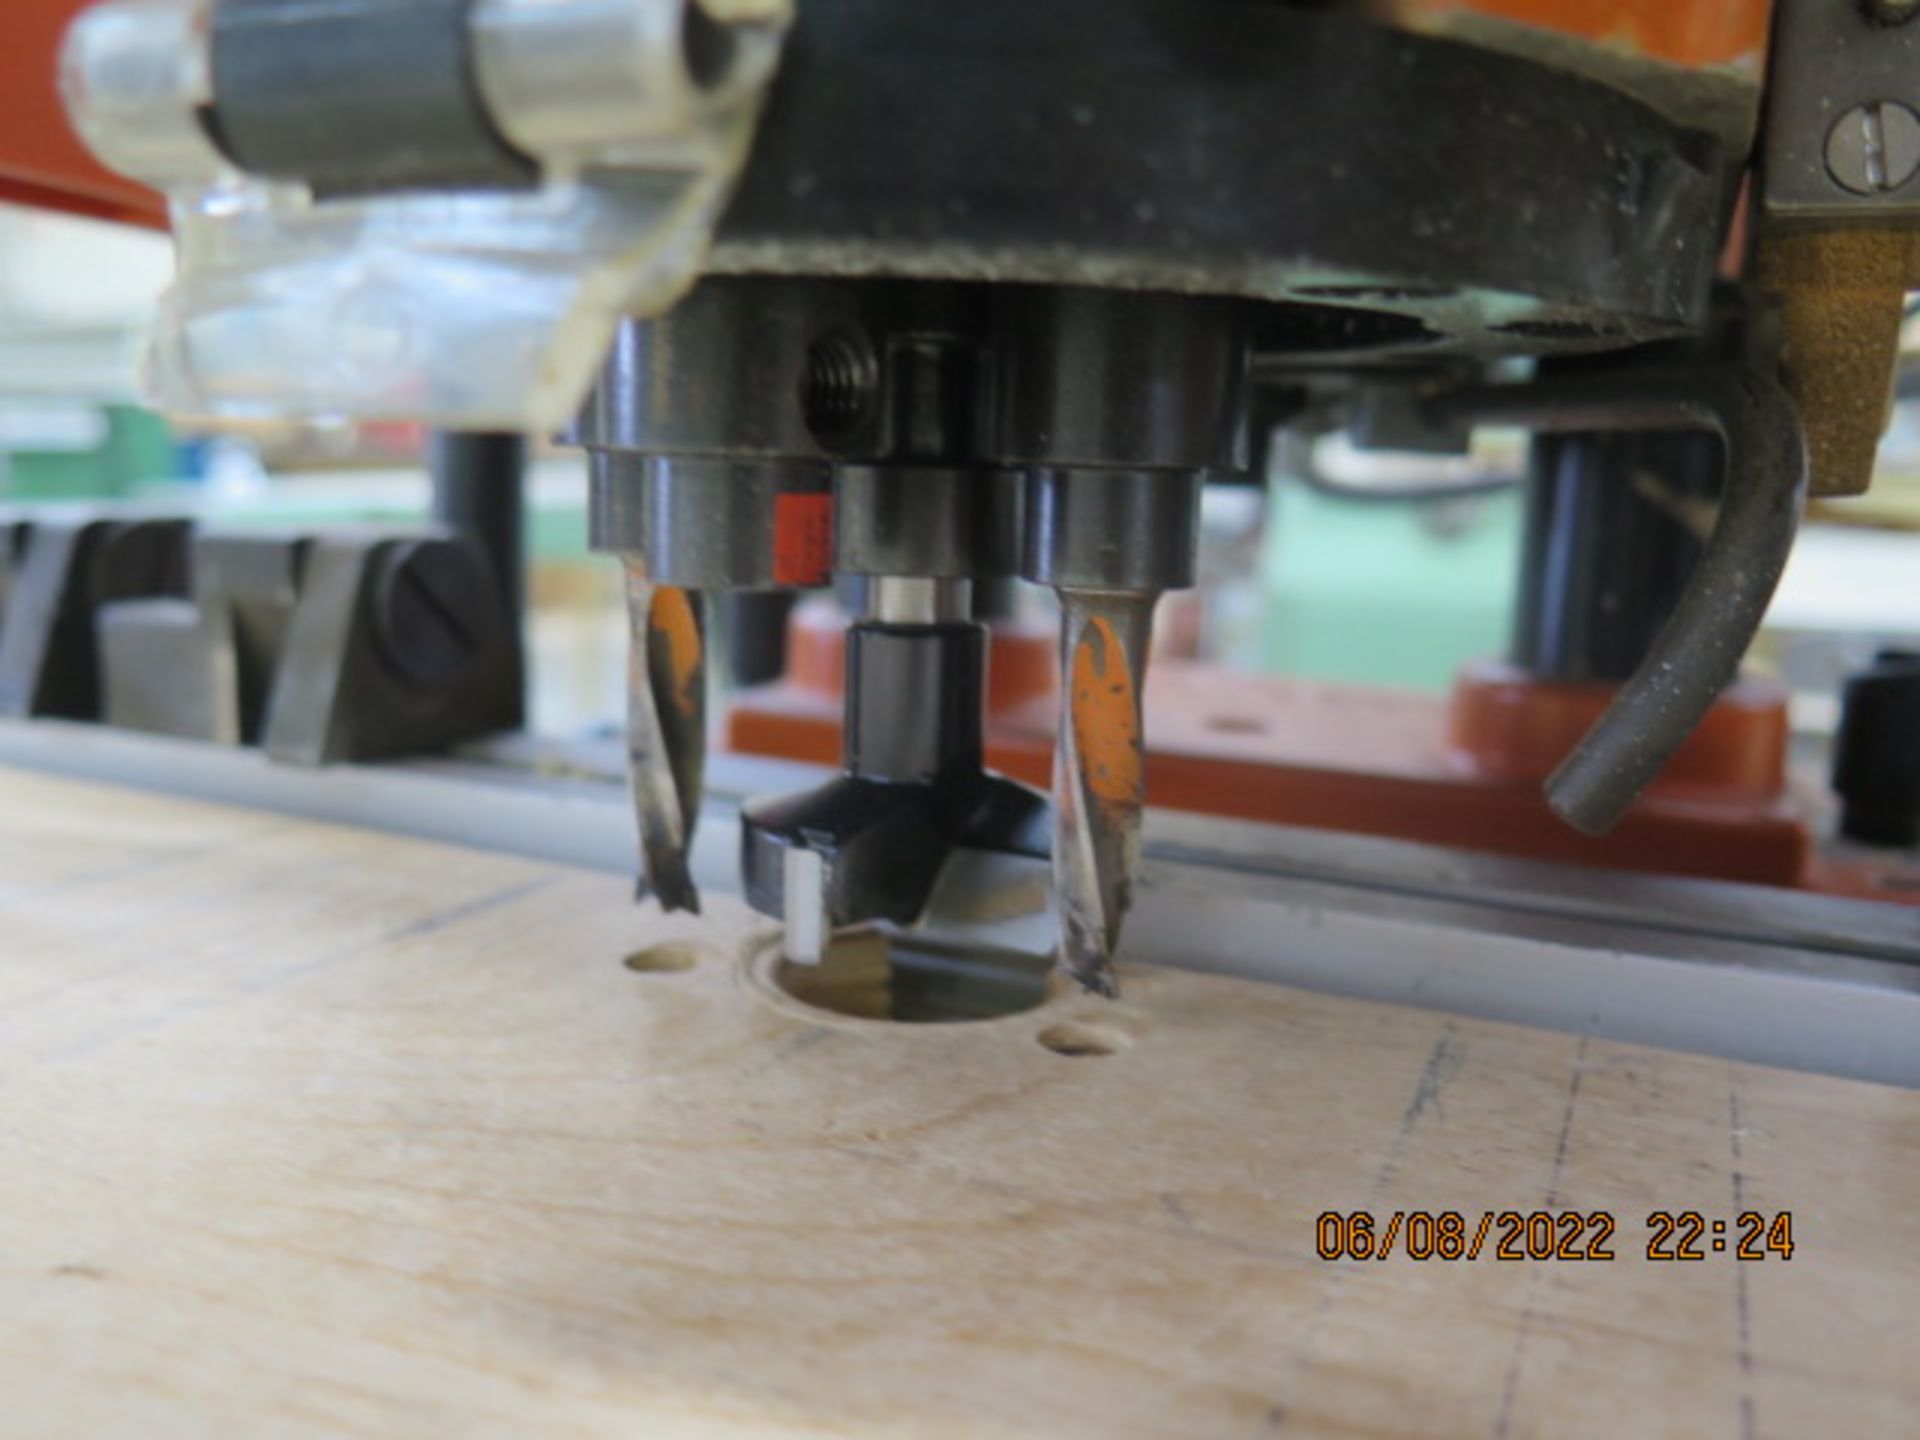 Blum mdl. M51N1004 “Mini Press” Hinge Router w/ Table (SOLD AS-IS - NO WARRANTY) - Image 4 of 6